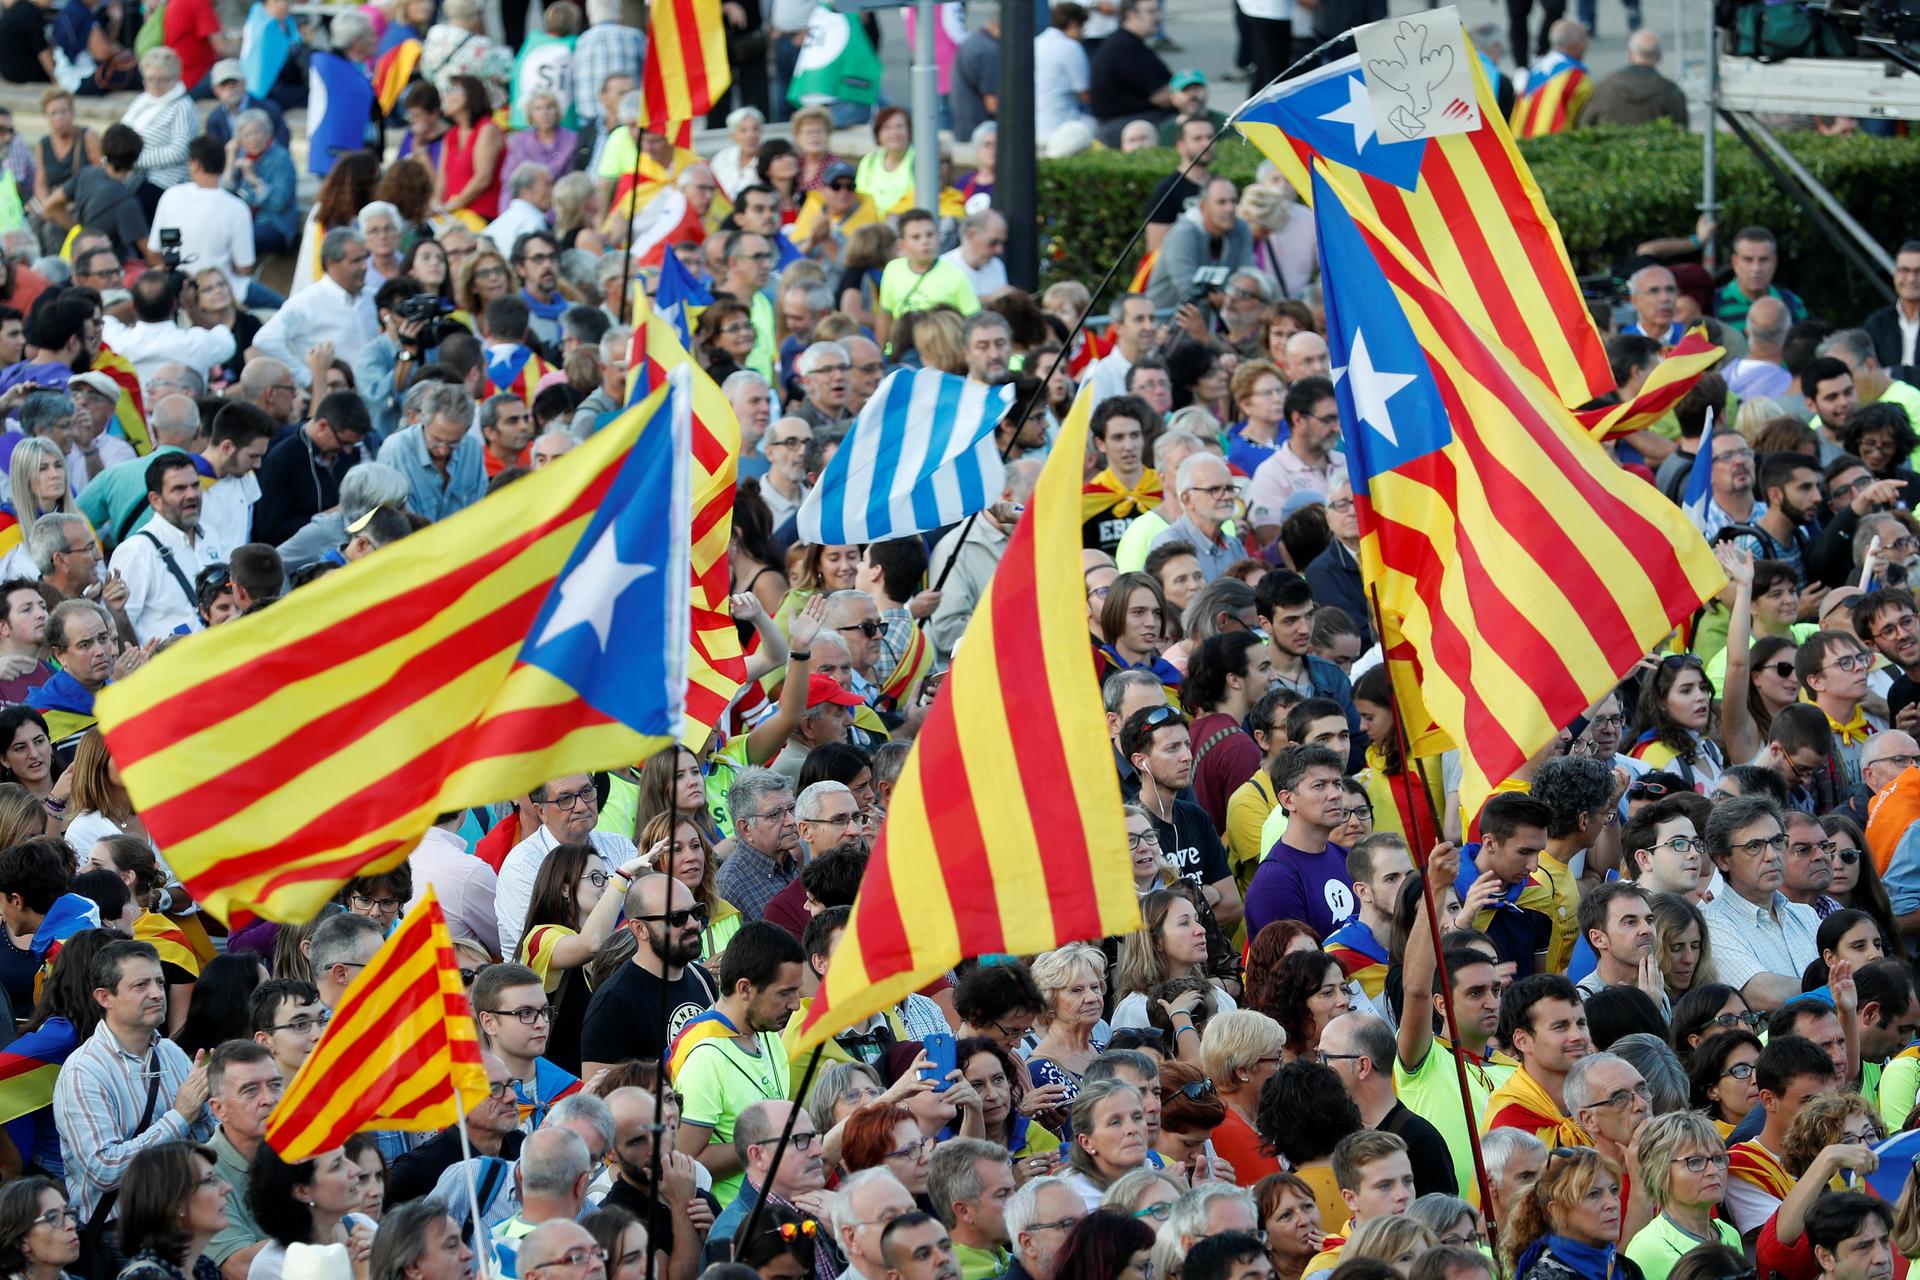 People hold Esteladas (Catalan separatist flags) as they wait for a closing rally in favour of the banned October 1 independence referendum in Barcelona, Spain.